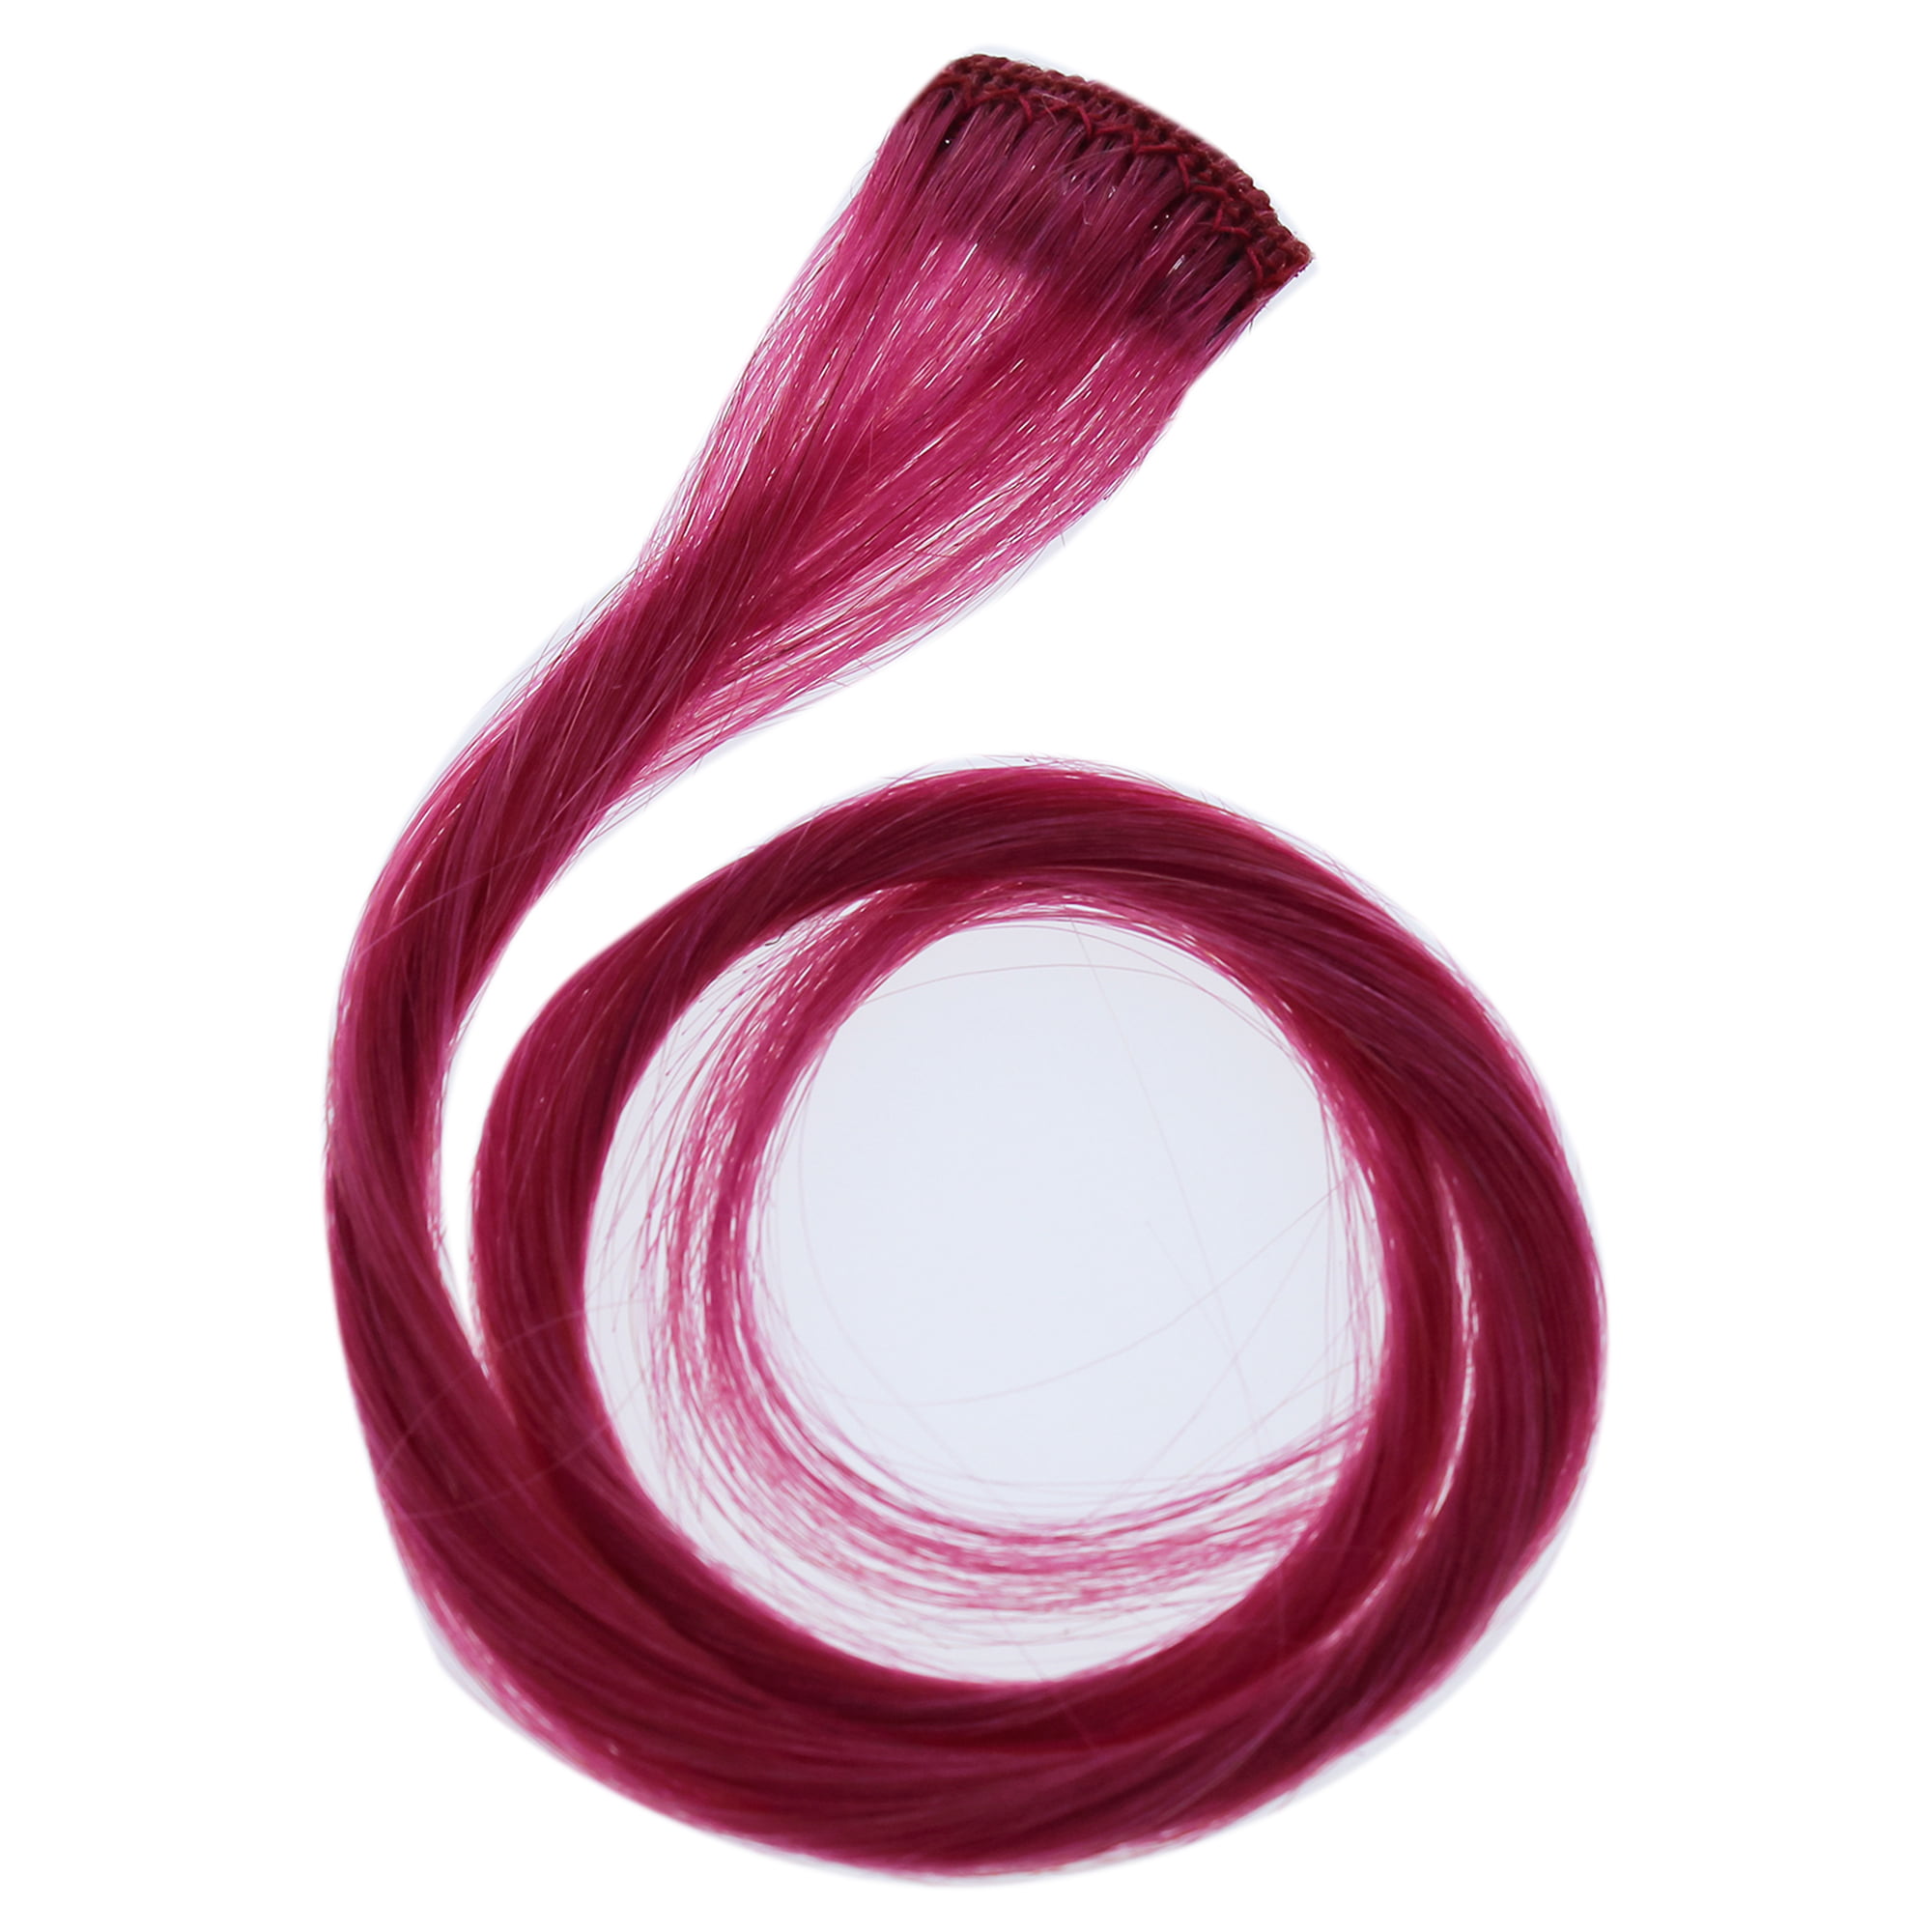 Human Hair Color Strip - Pink by Hairdo for Women - 16 Inch Color Strip -  